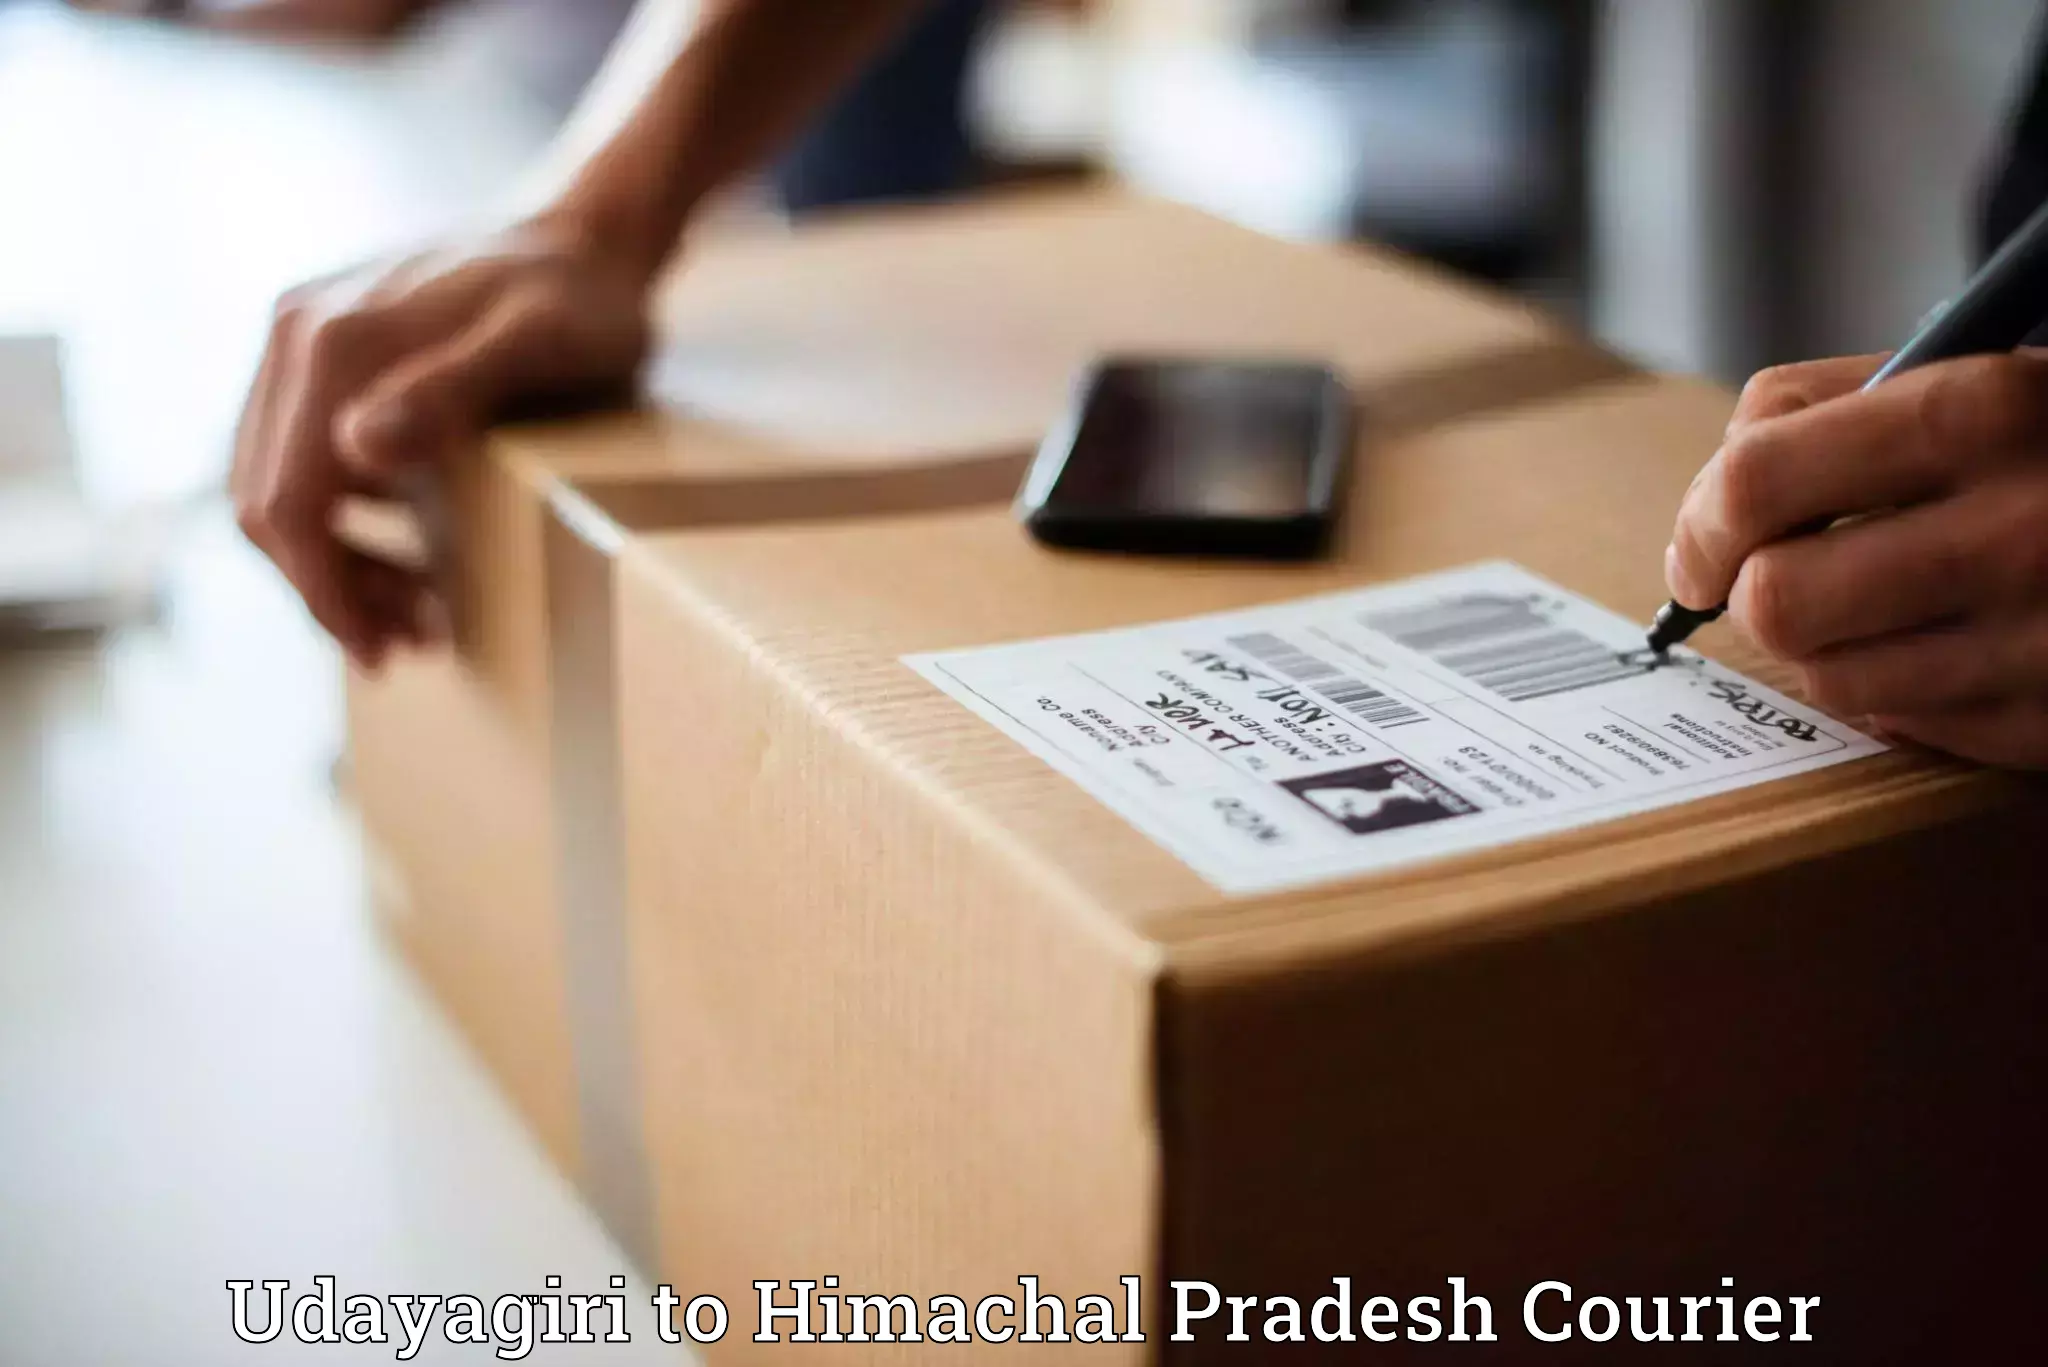 Affordable parcel service Udayagiri to YS Parmar University of Horticulture and Forestry Solan